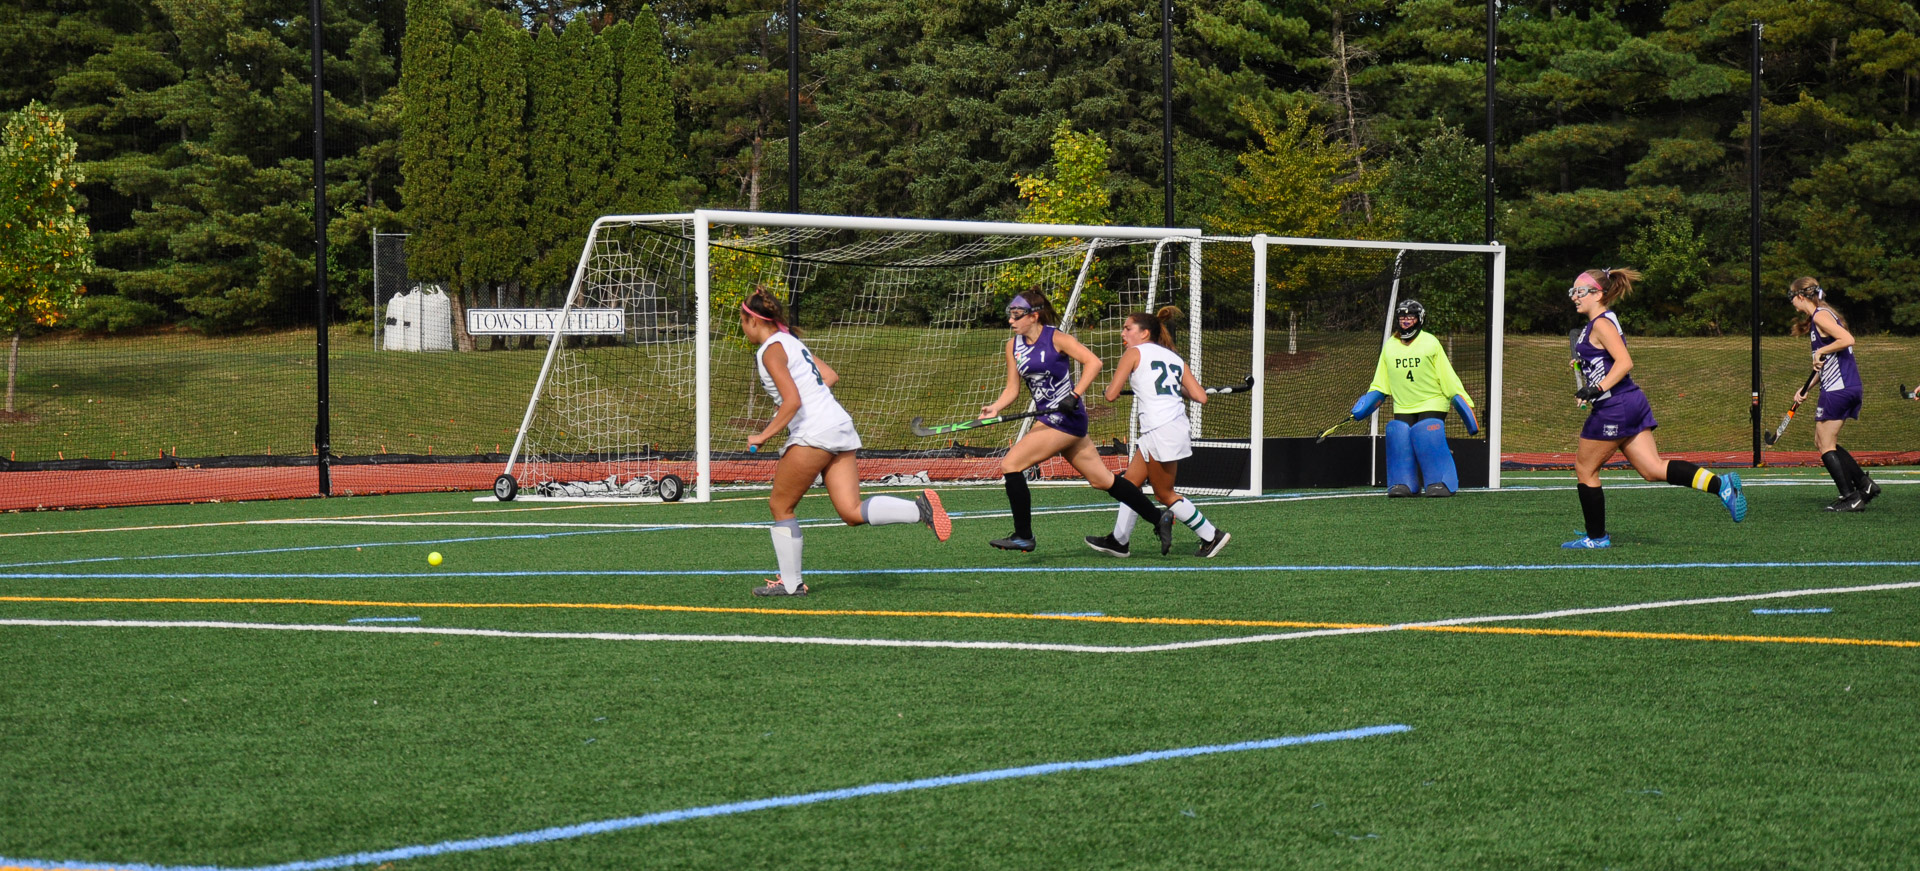 Amelia Danan '23 beats a defender to the ball in the corner. 